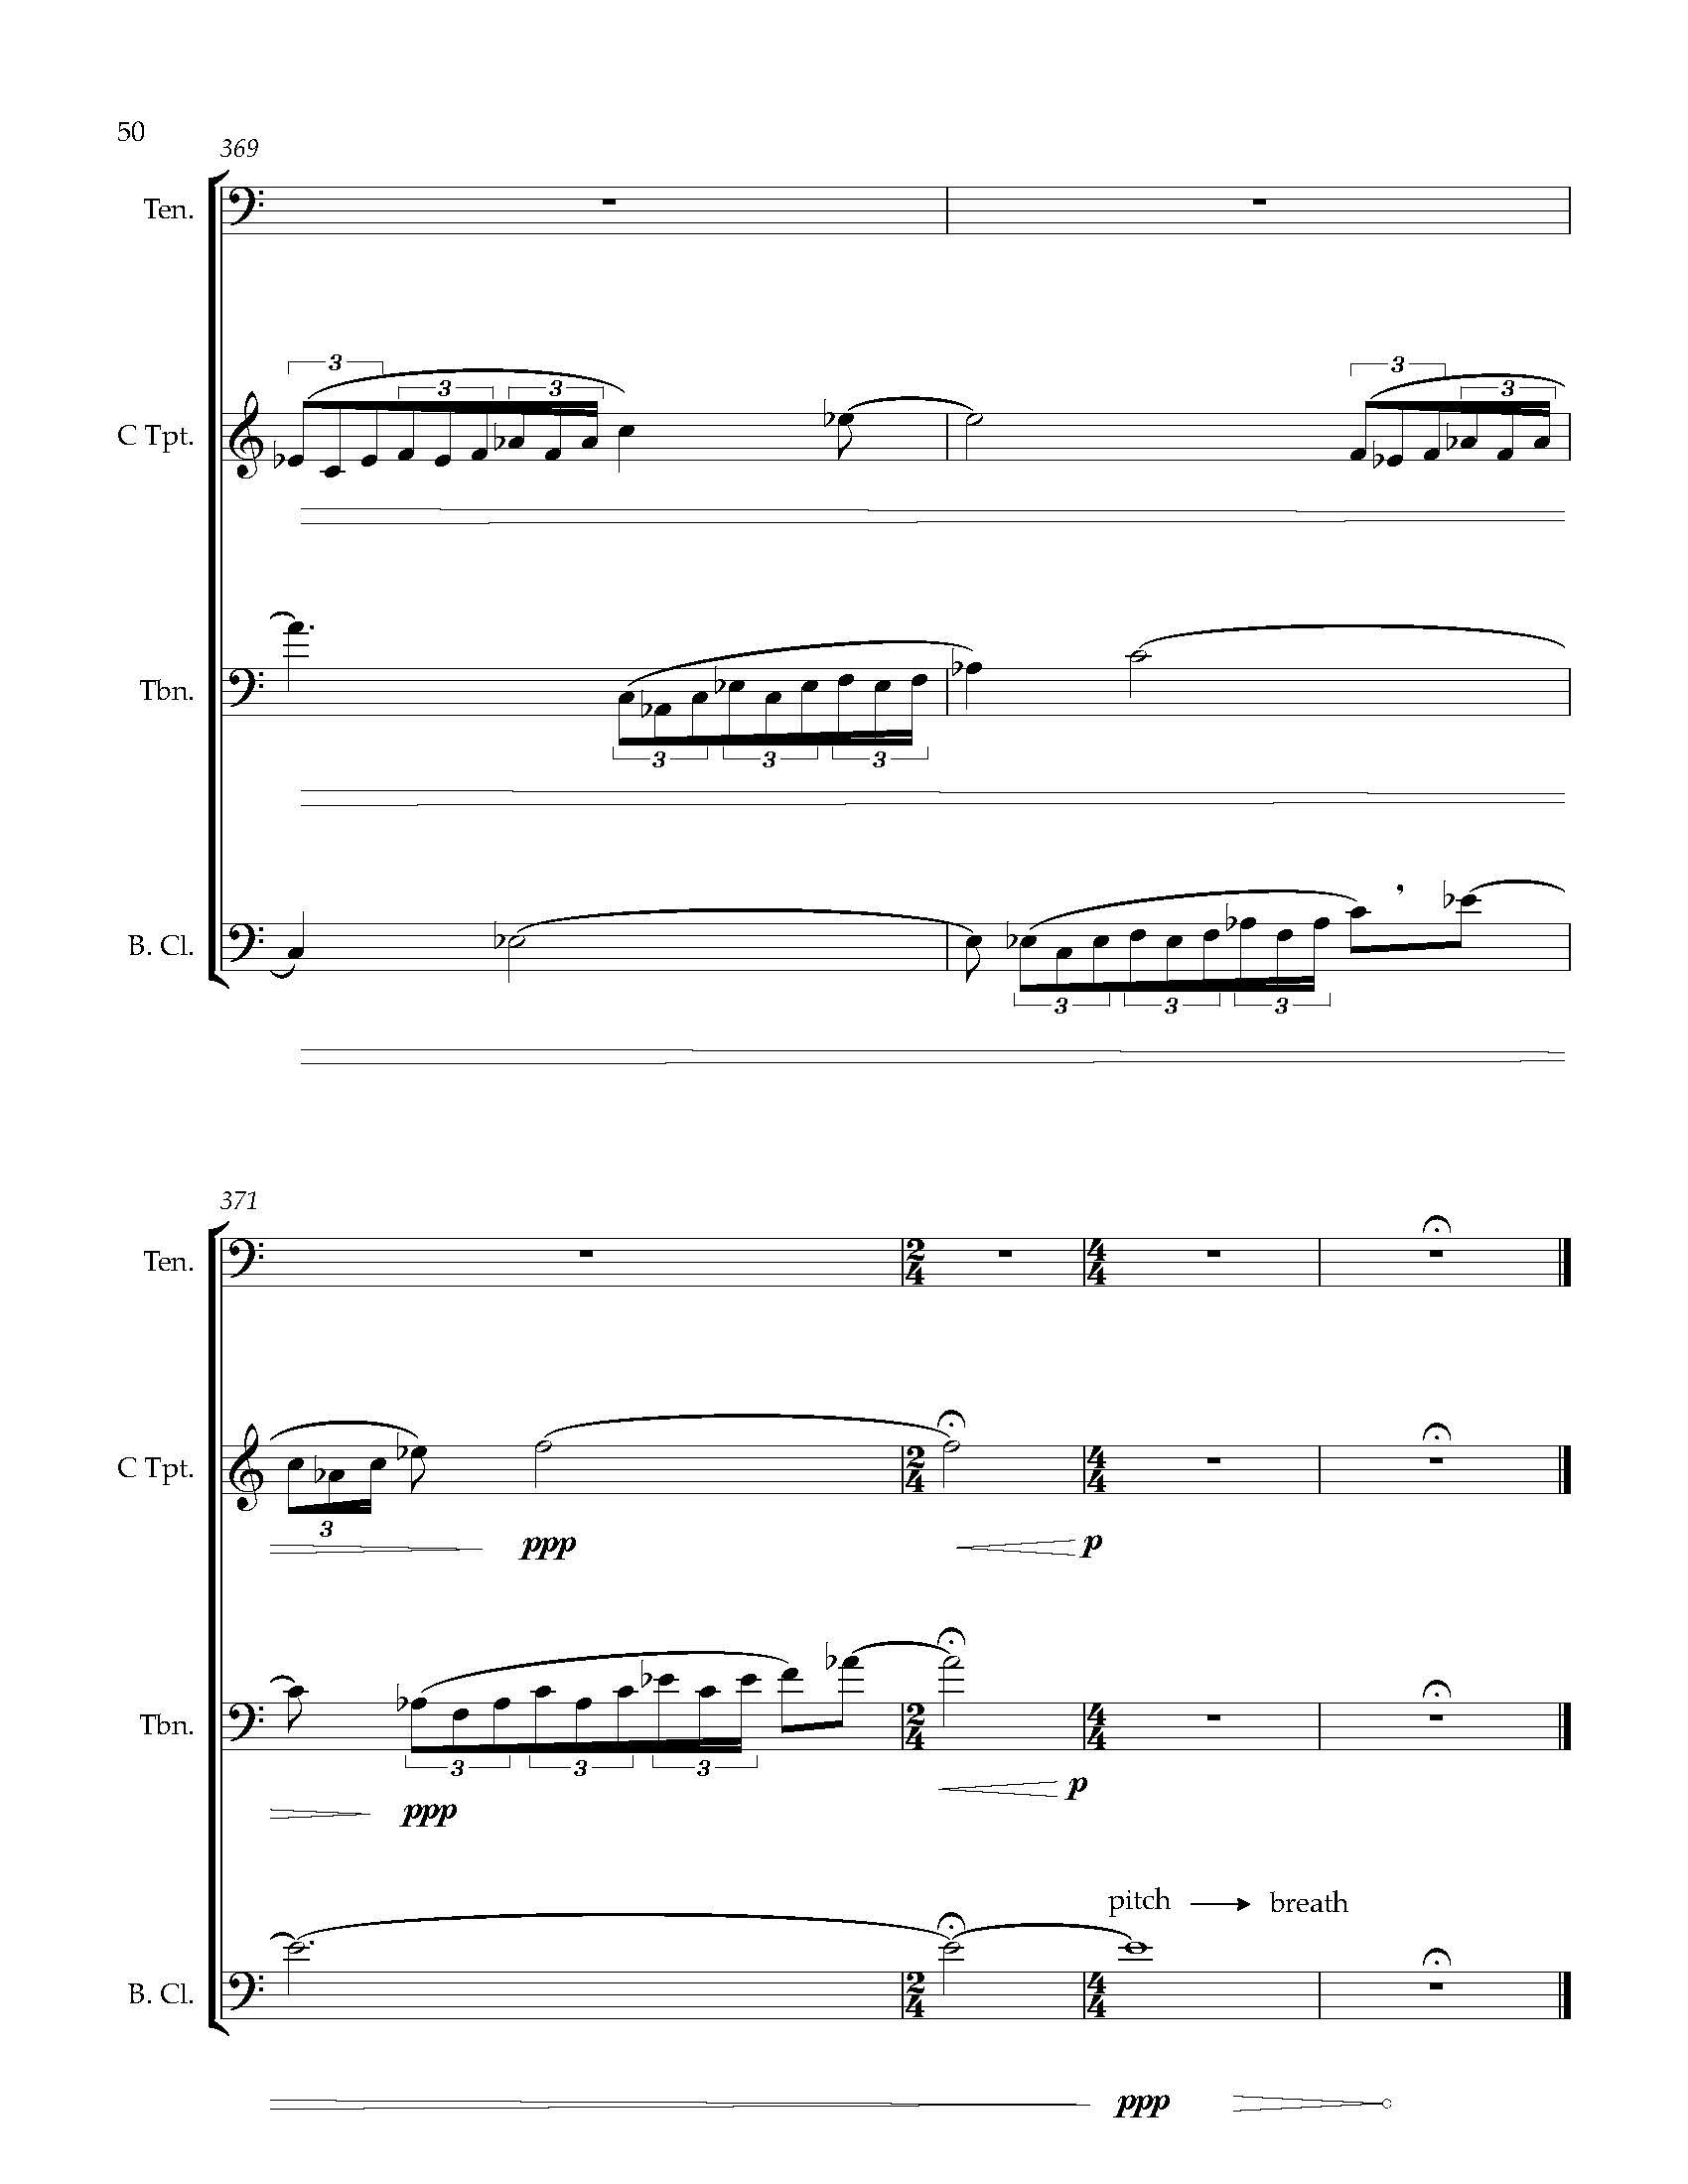 Many Worlds [1] - Complete Score_Page_59.jpg